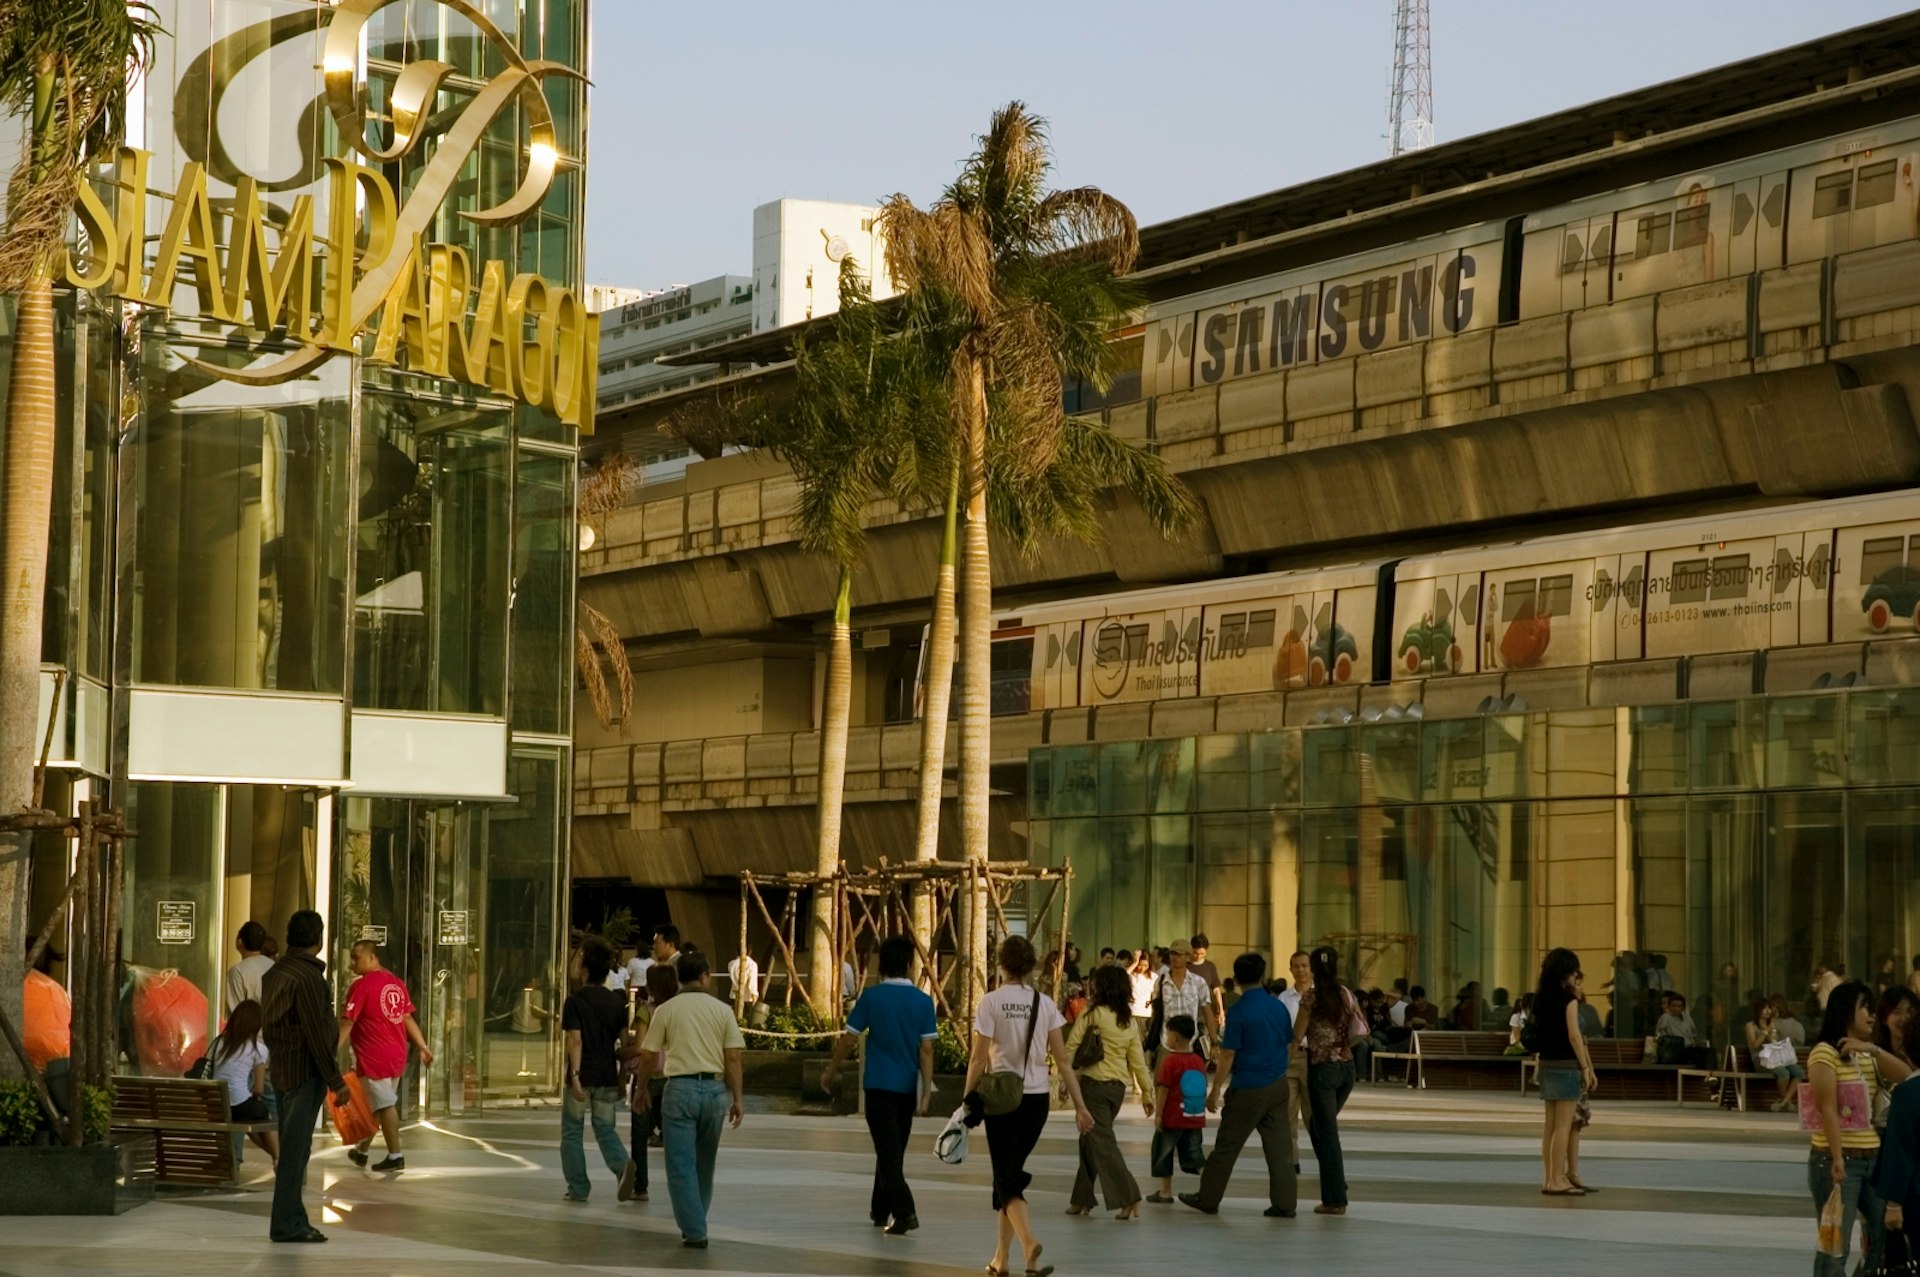 Visitors walking outside Siam Paragon shopping centre in Bangkok © Mick Elmore / Lonely Planet